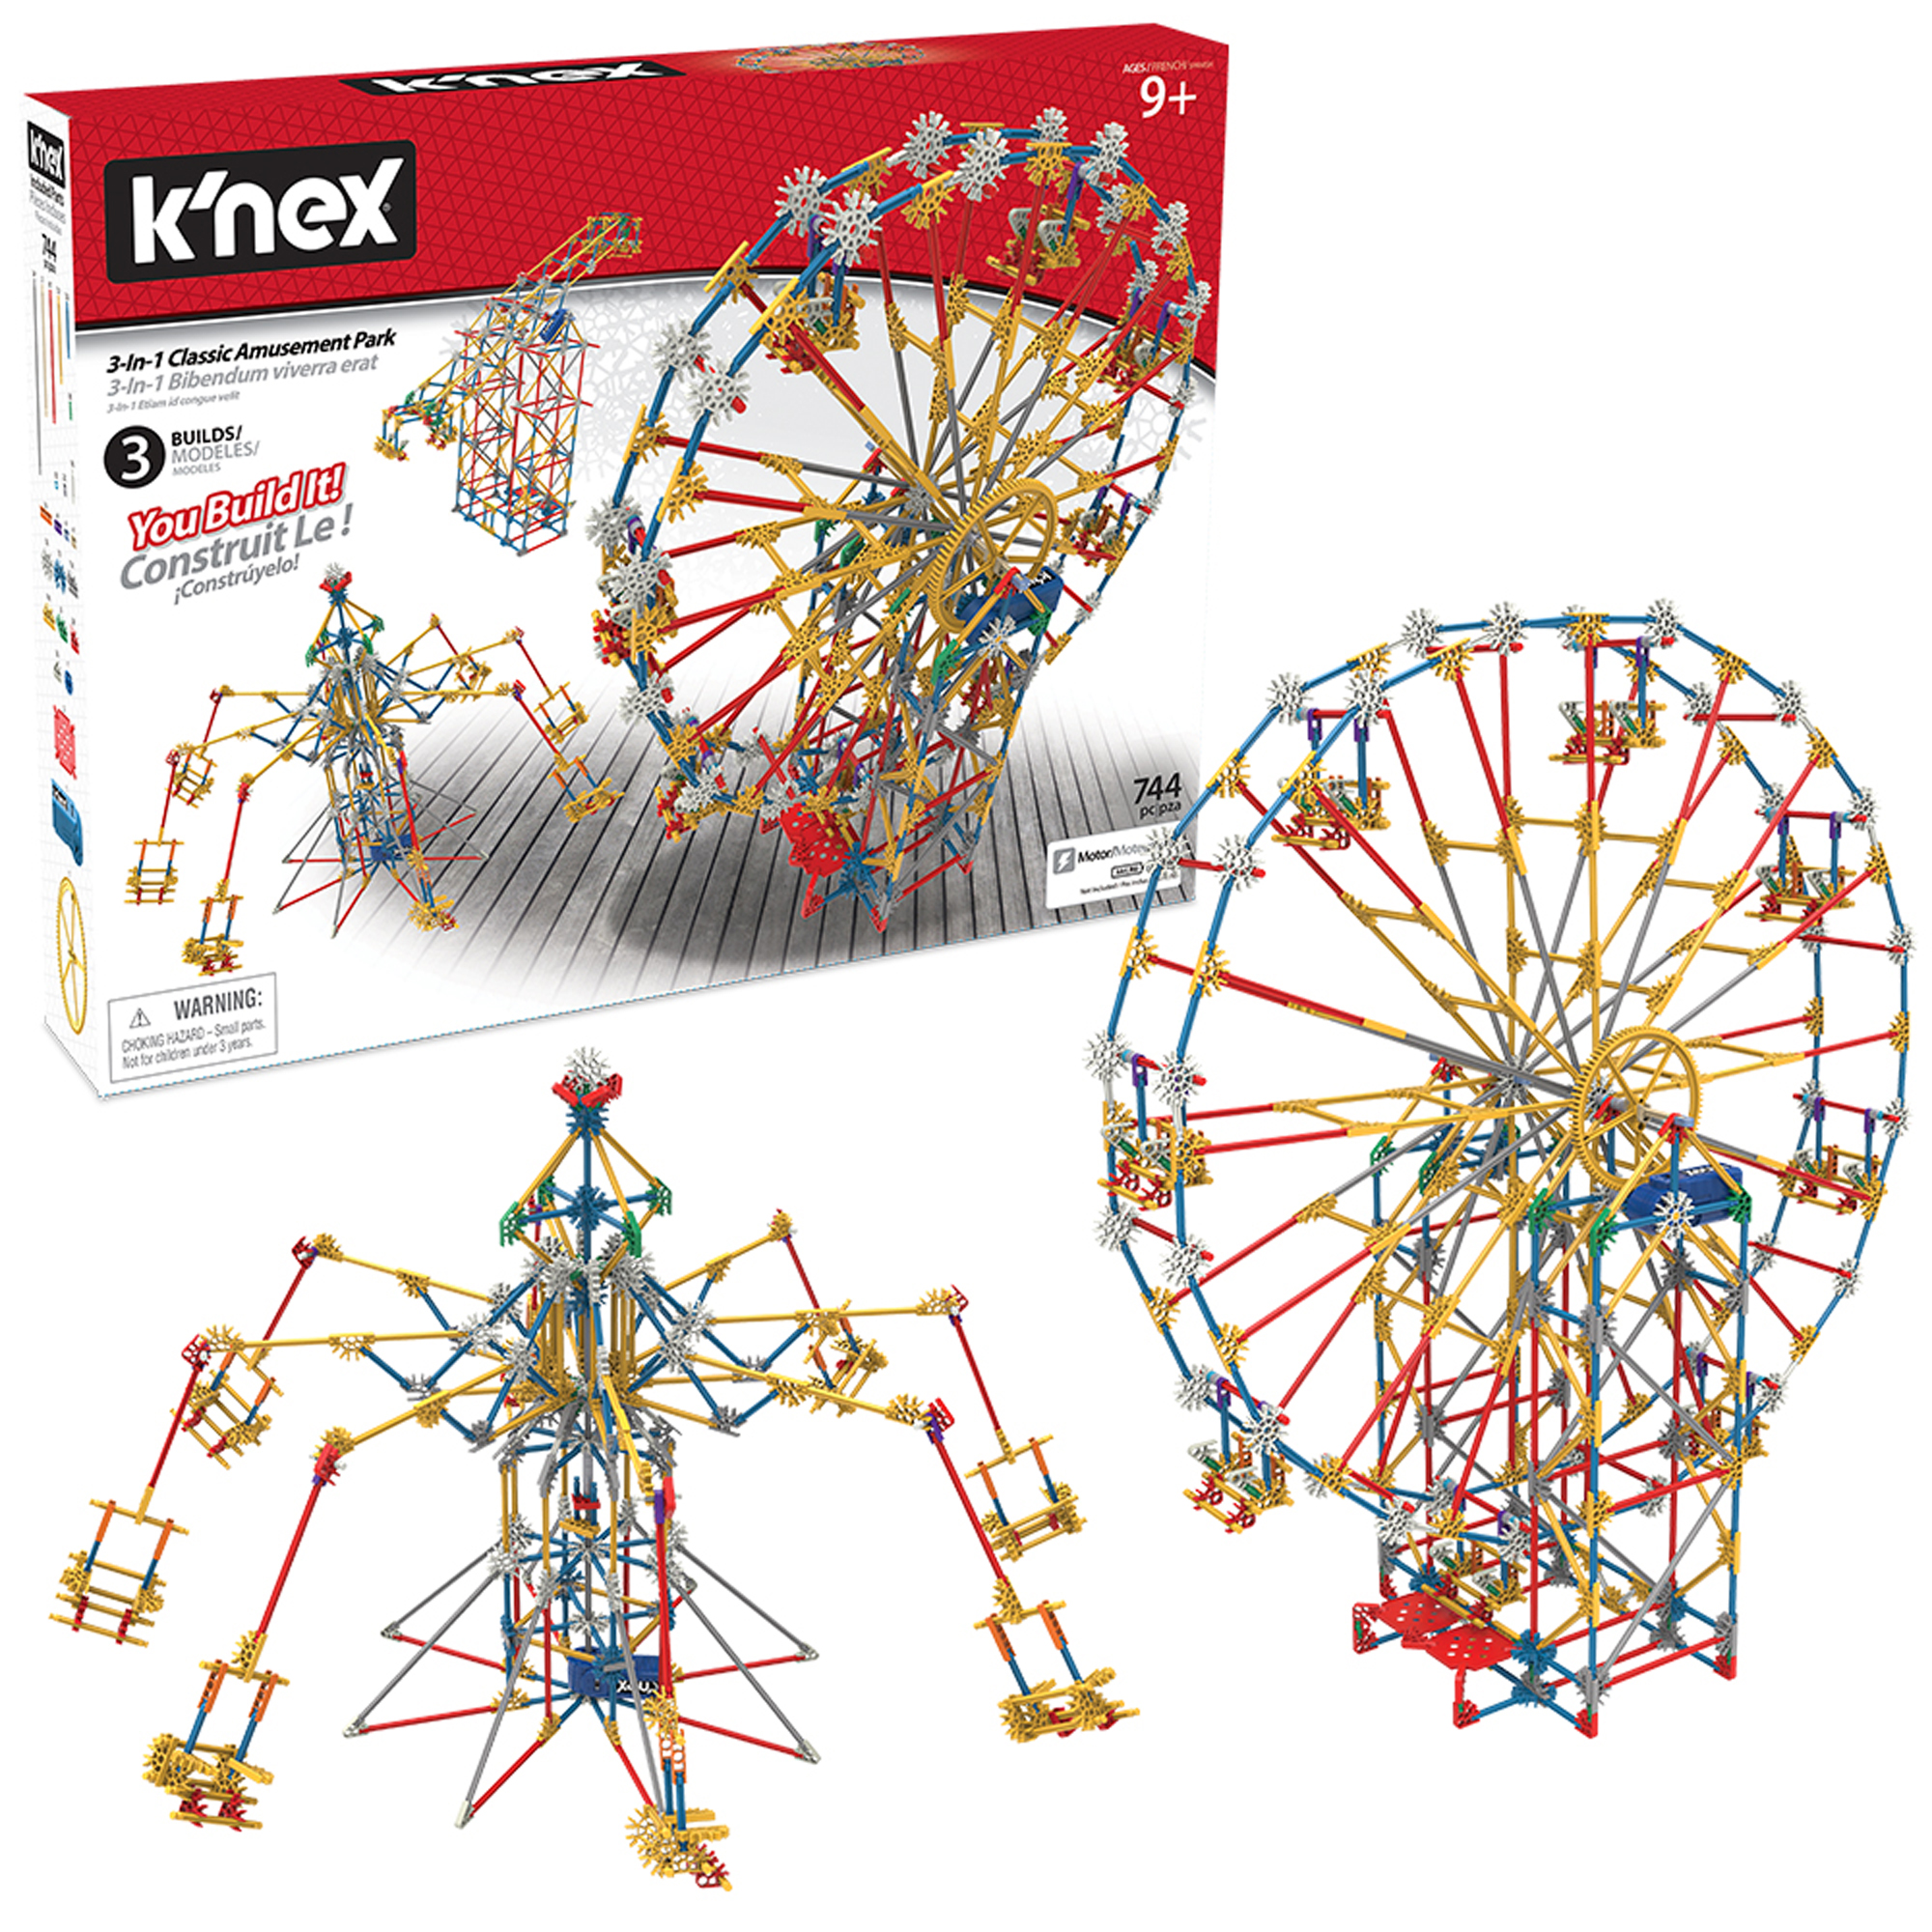 K'NEX Thrill Rides - 3-in-1 Classic Amusement Park Building Set - 744 Pieces - Ages 9 Engineering Education Toy - image 1 of 6